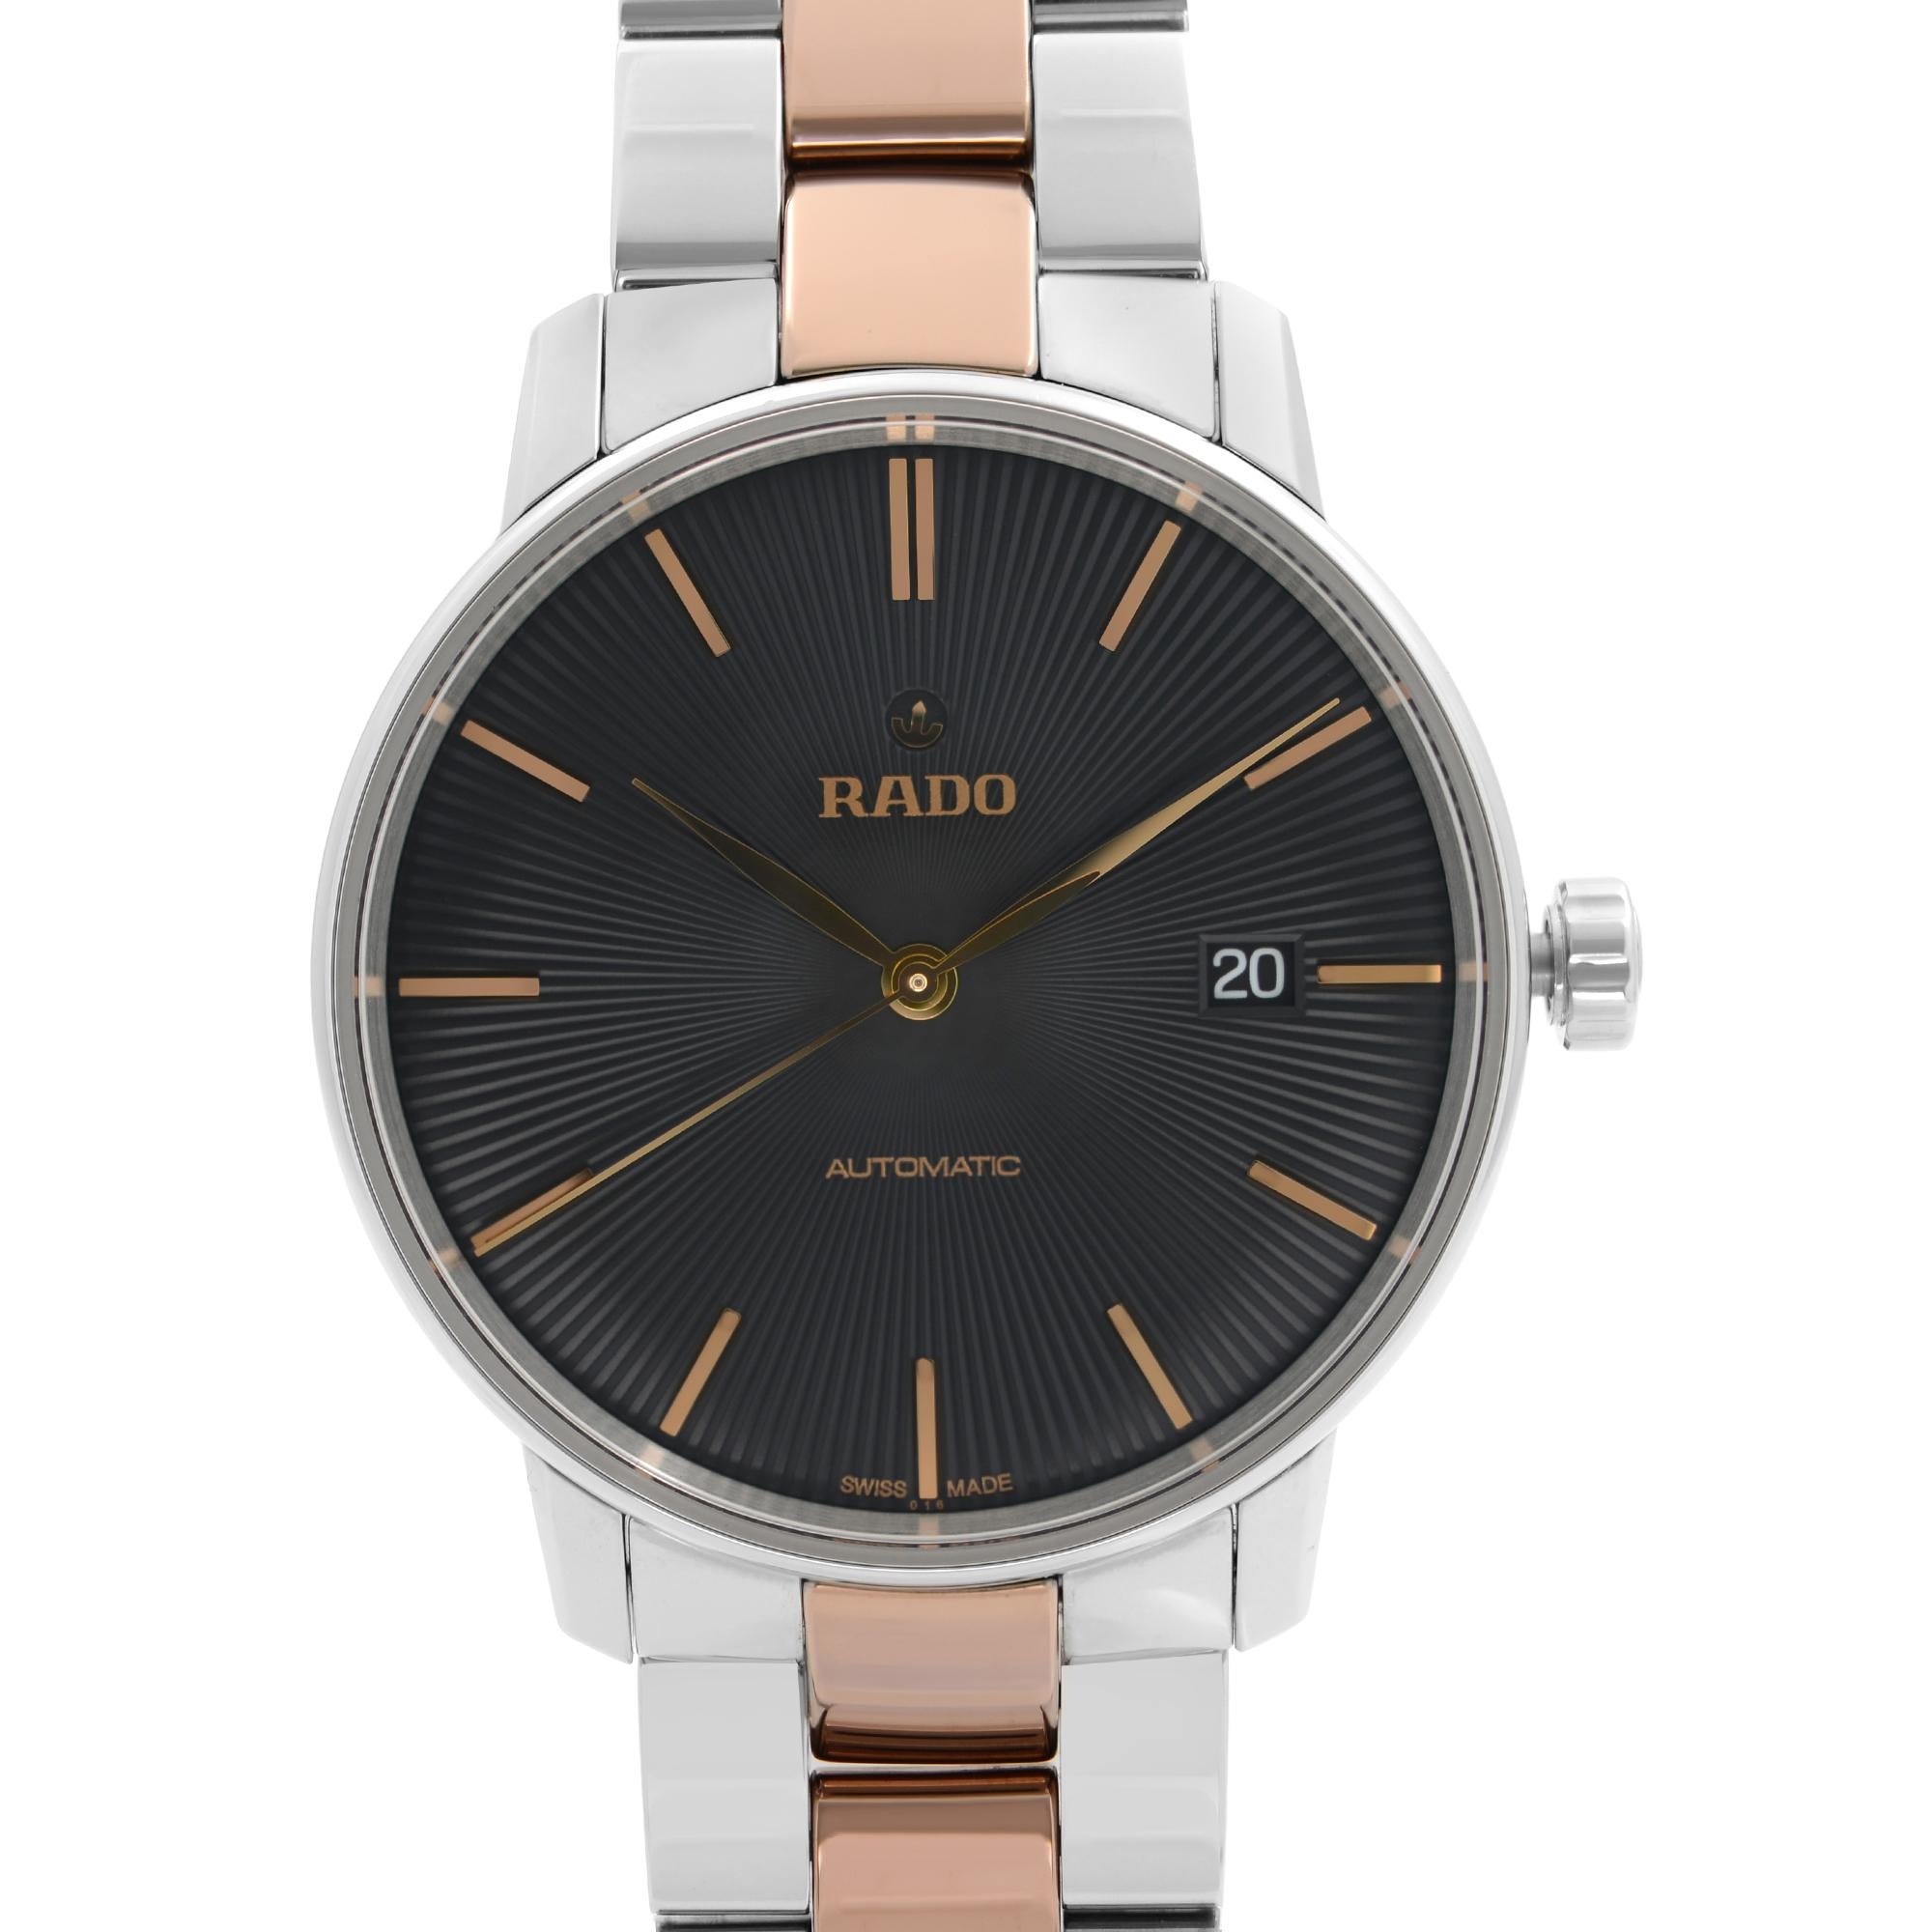 Display Model Rado Coupole Classic Steel Ceramic Black Dial Automatic Men's Watch R22860162. Comes with an Original Box and Chronostore Authenticity Card. This Watch Covered by 3-year Chronostore Warranty. 
Details:
MSRP 1600
Brand Rado
Department